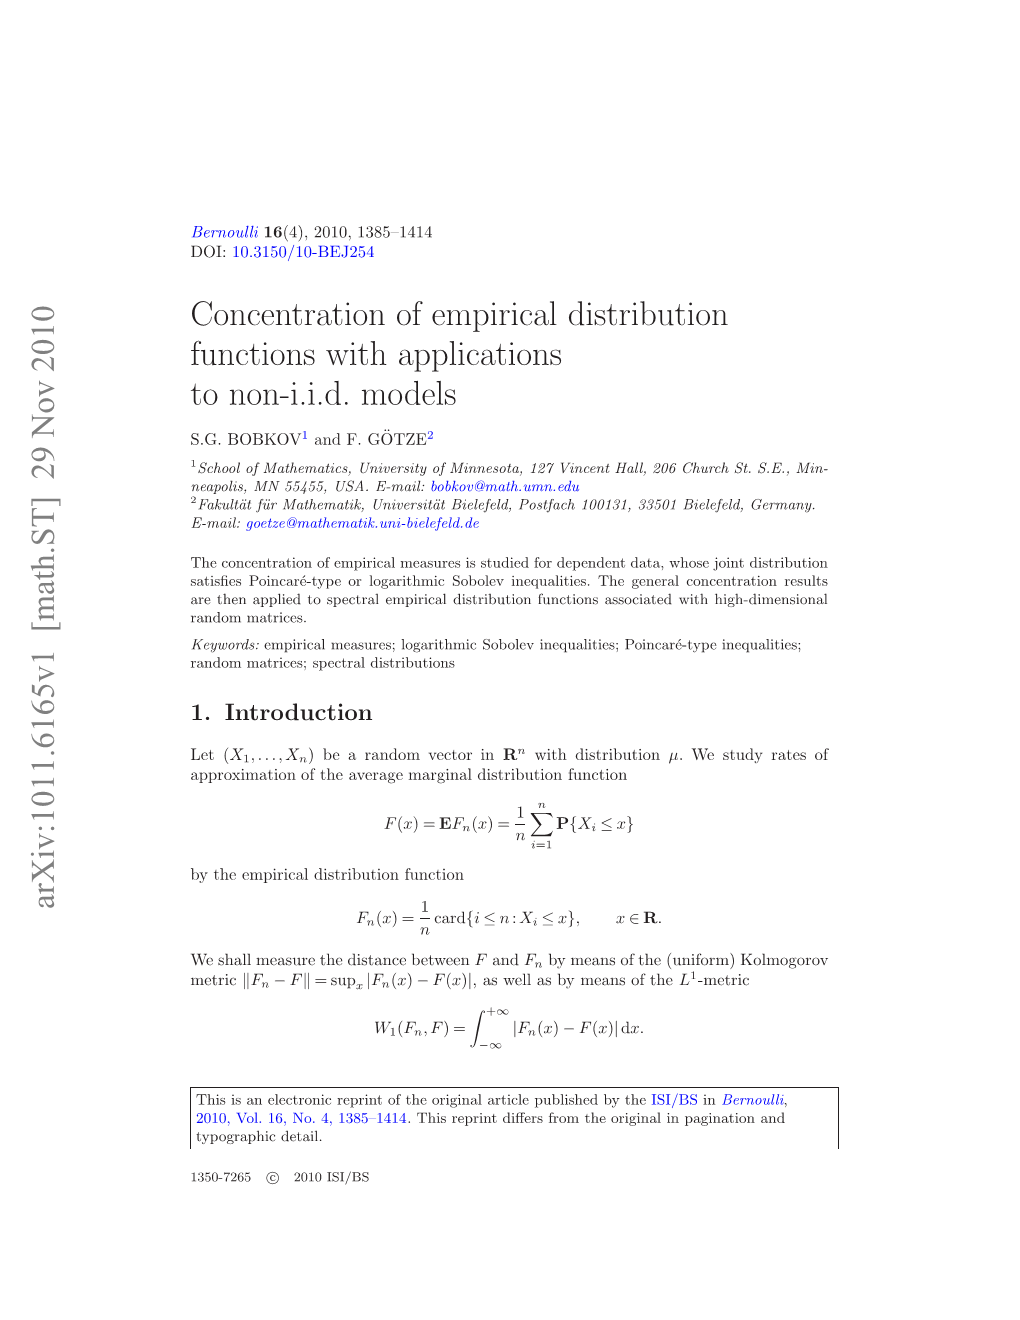 Concentration of Empirical Distribution Functions with Applications to Non